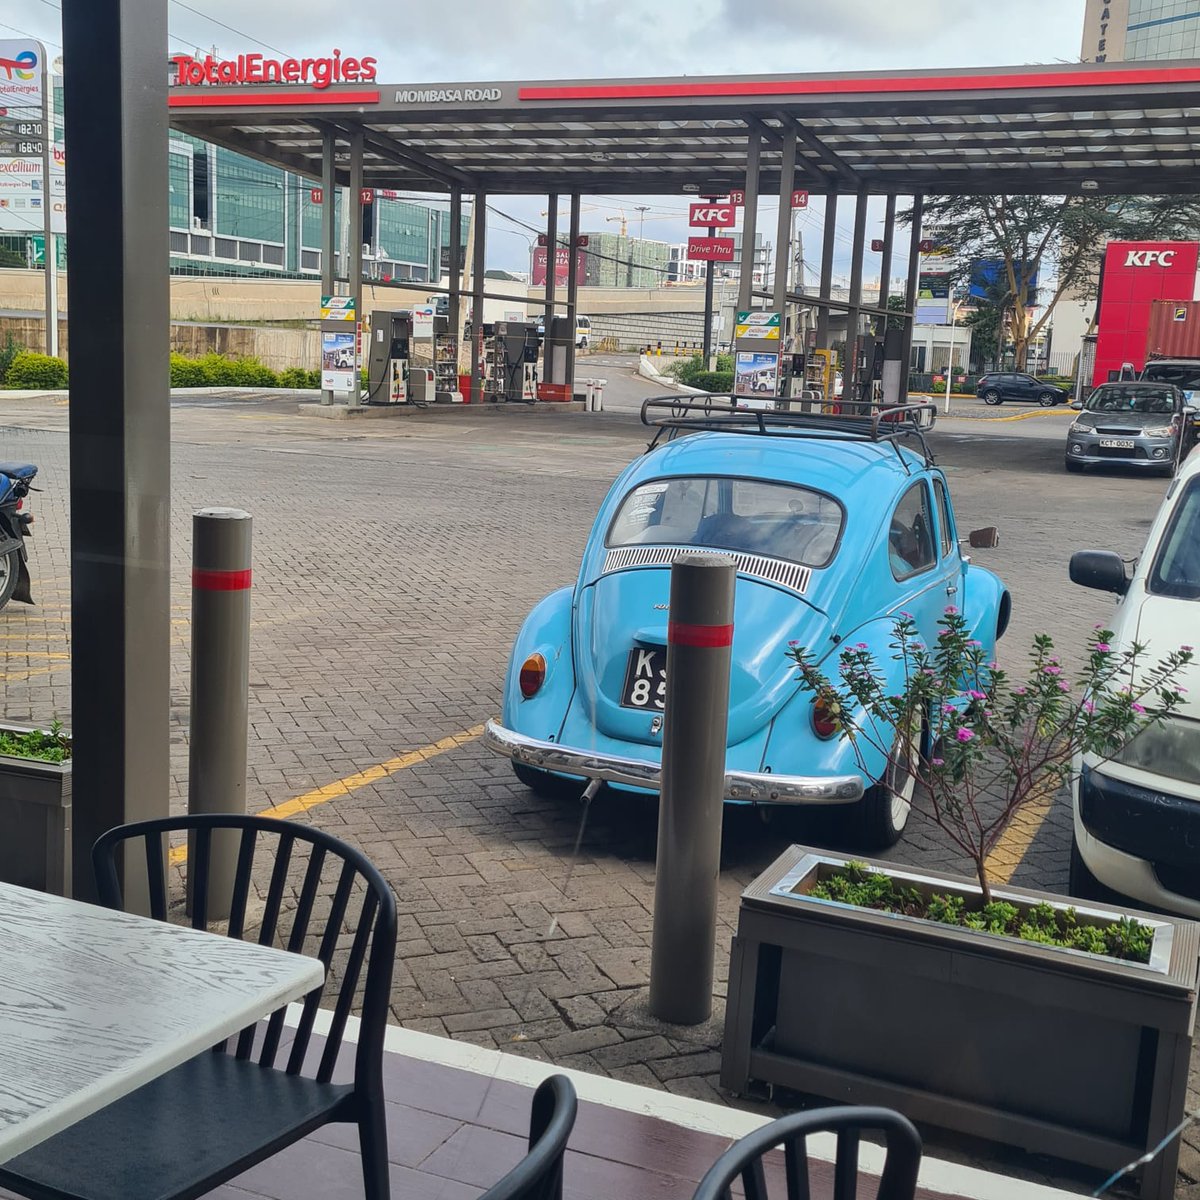 This will be a trip of a life time
classic Volkswagen going for a 2000km road trip

first  200kms Down
next stop Tsavo.

#vwbugs2krun